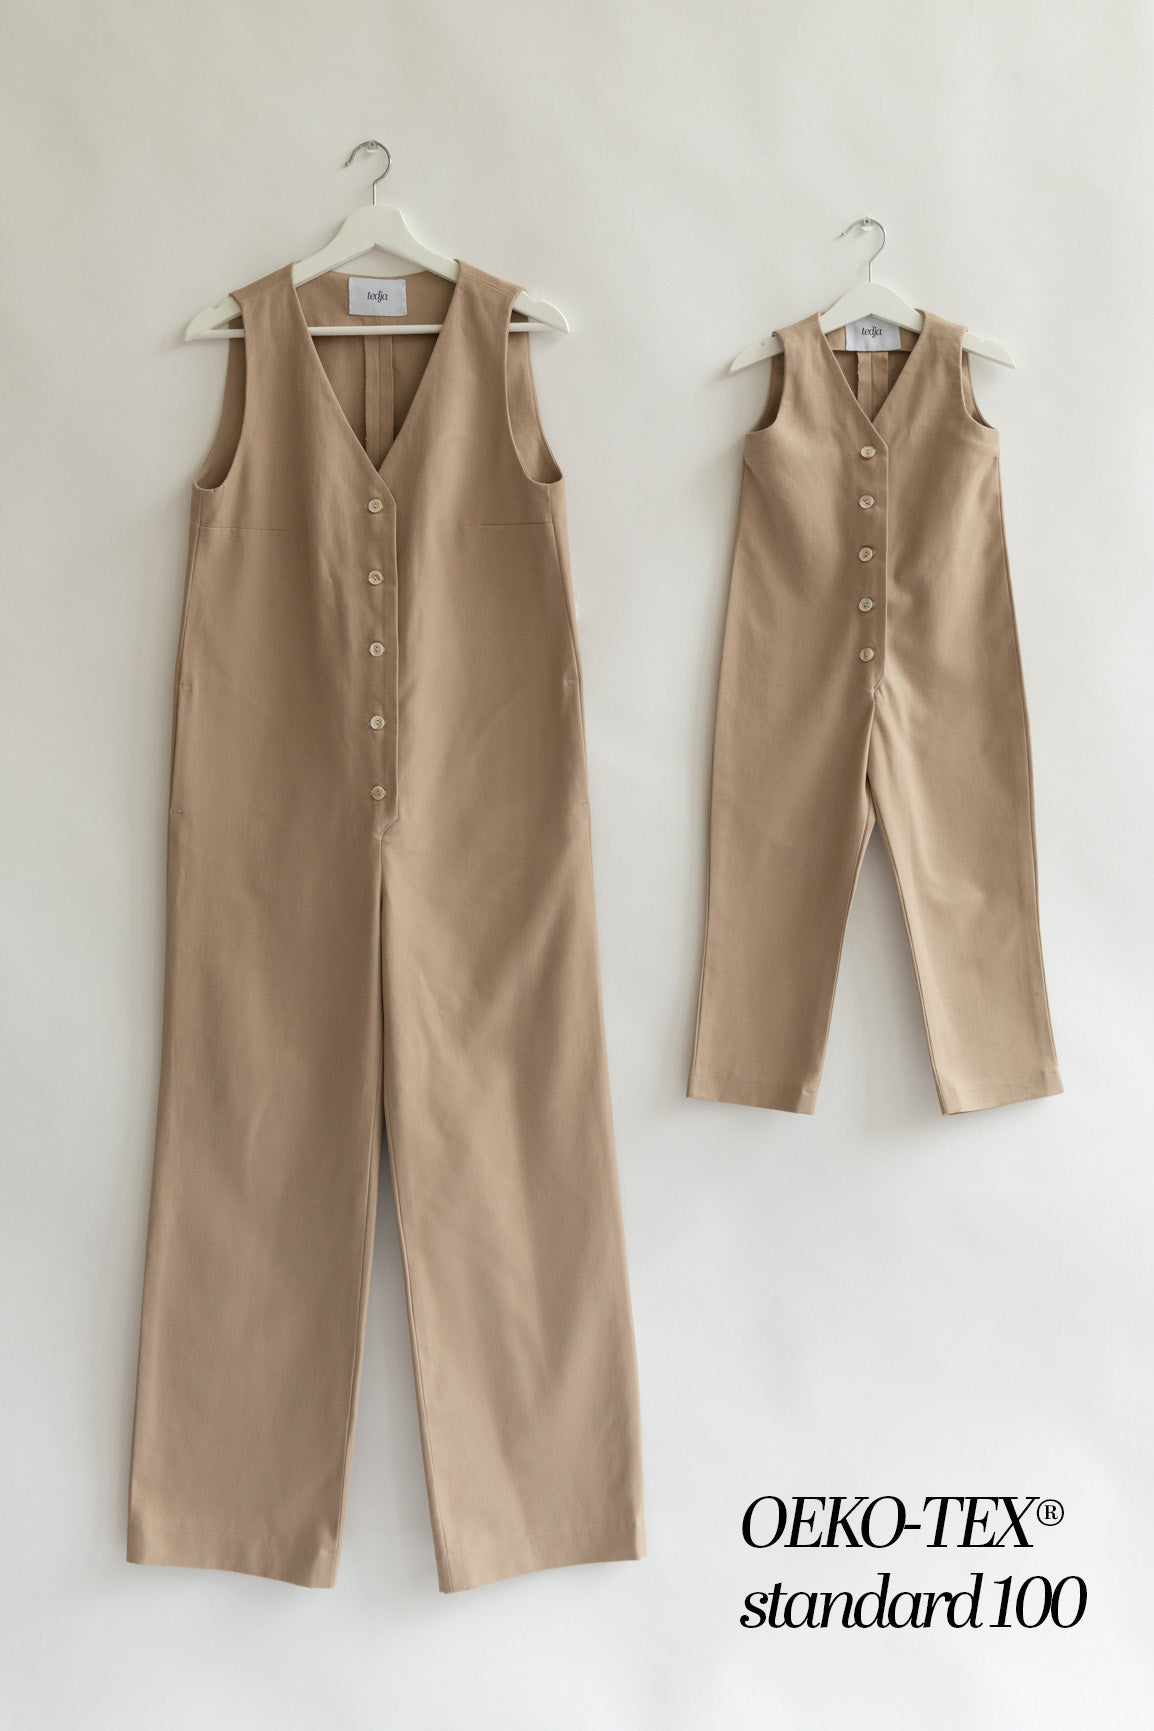 Beige color Jumpsuit overall workwear cotton canvas with pockets 5 buttons v-neck tall girls short girls oeko-tex 